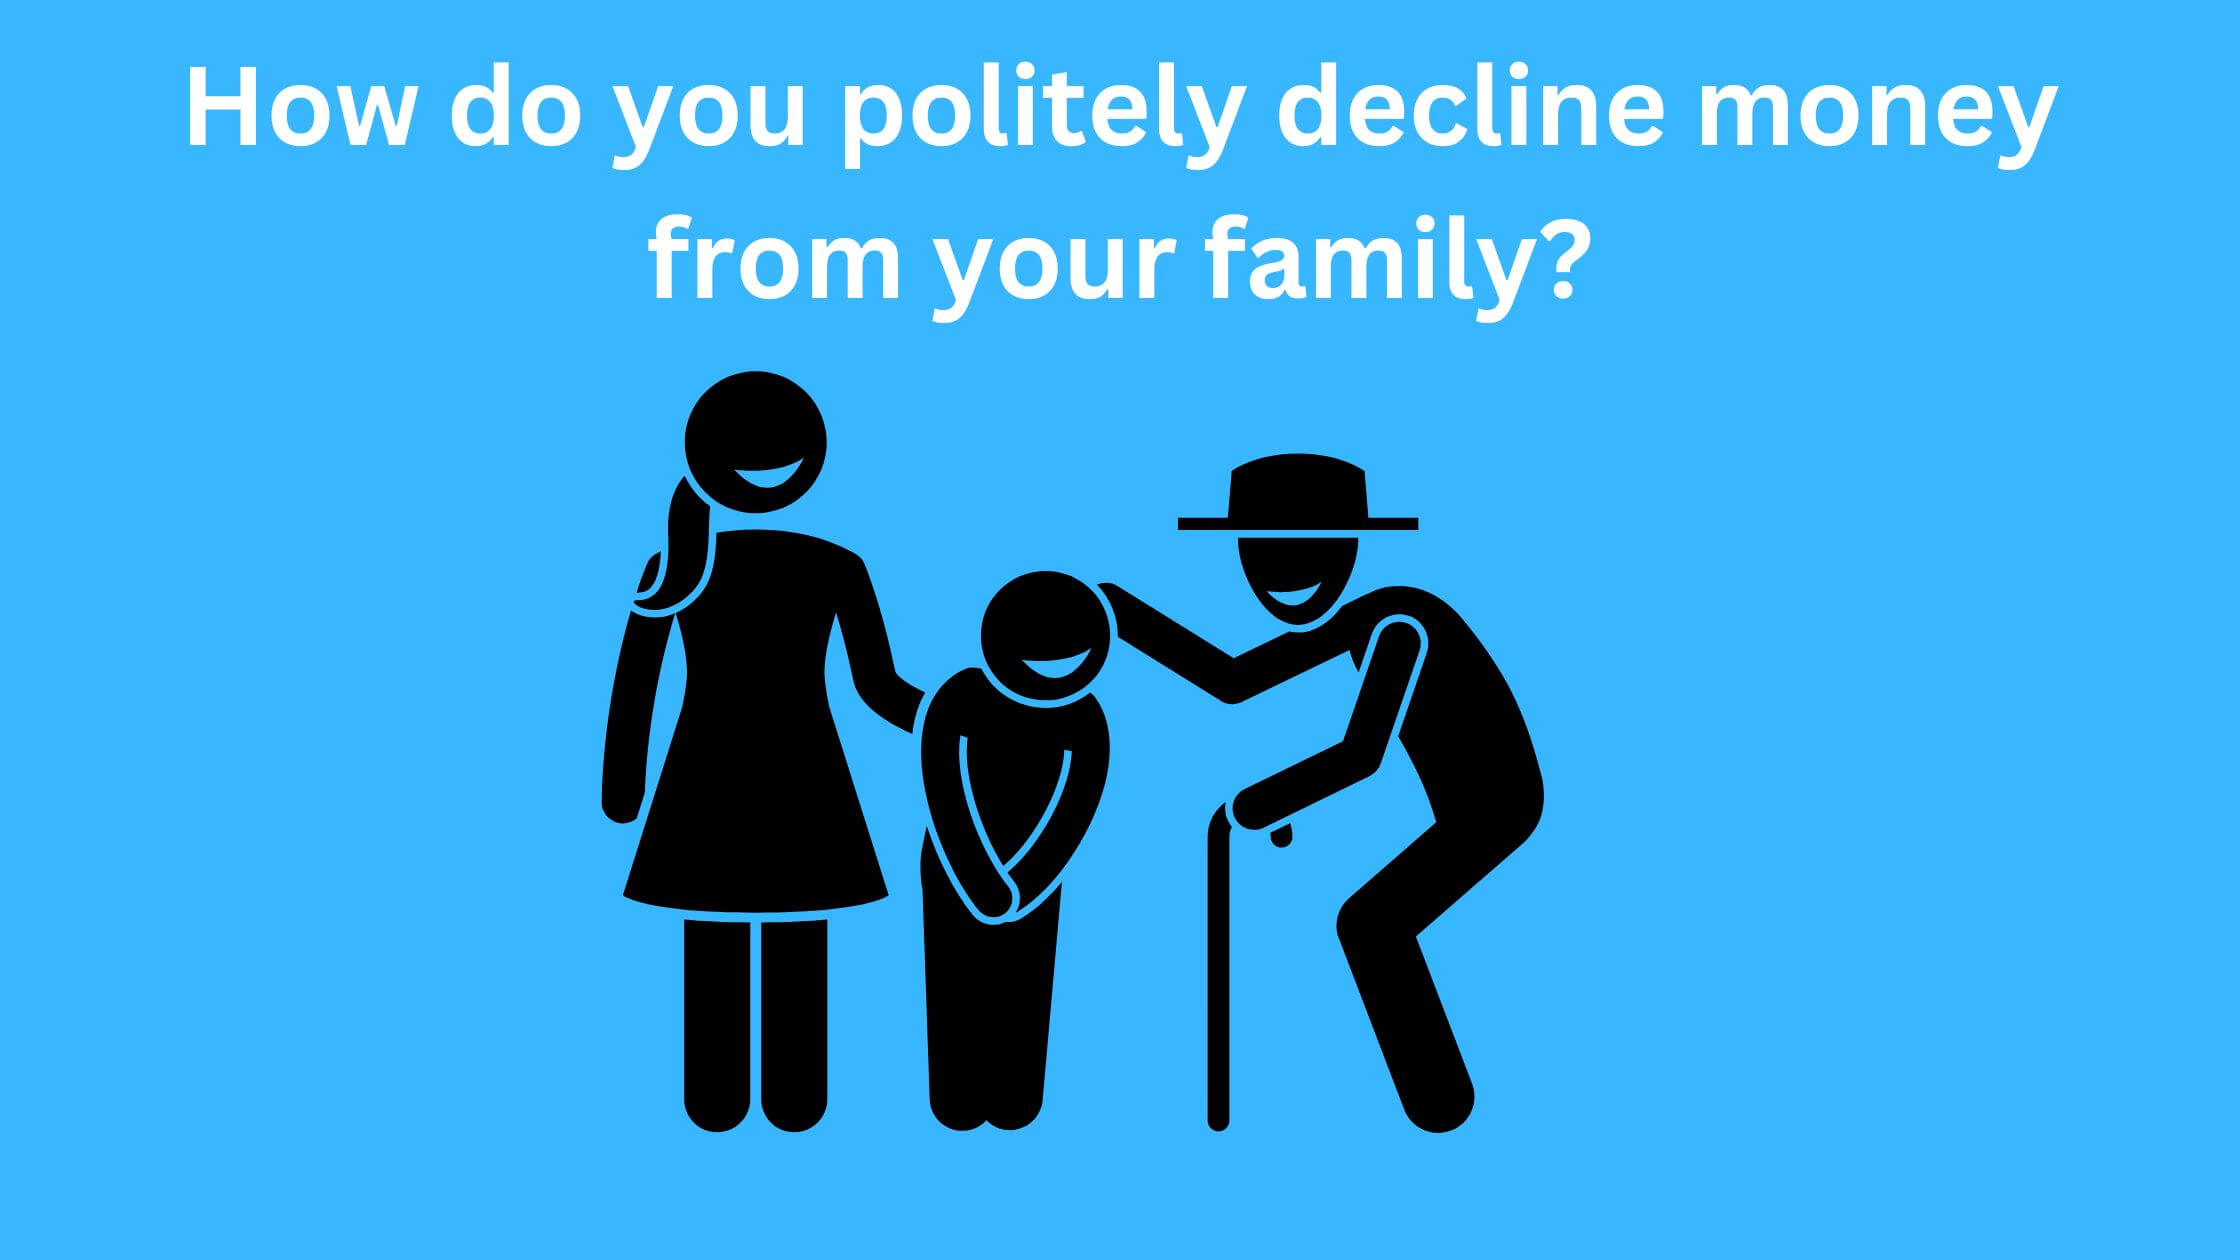 How do you politely decline money from your family?